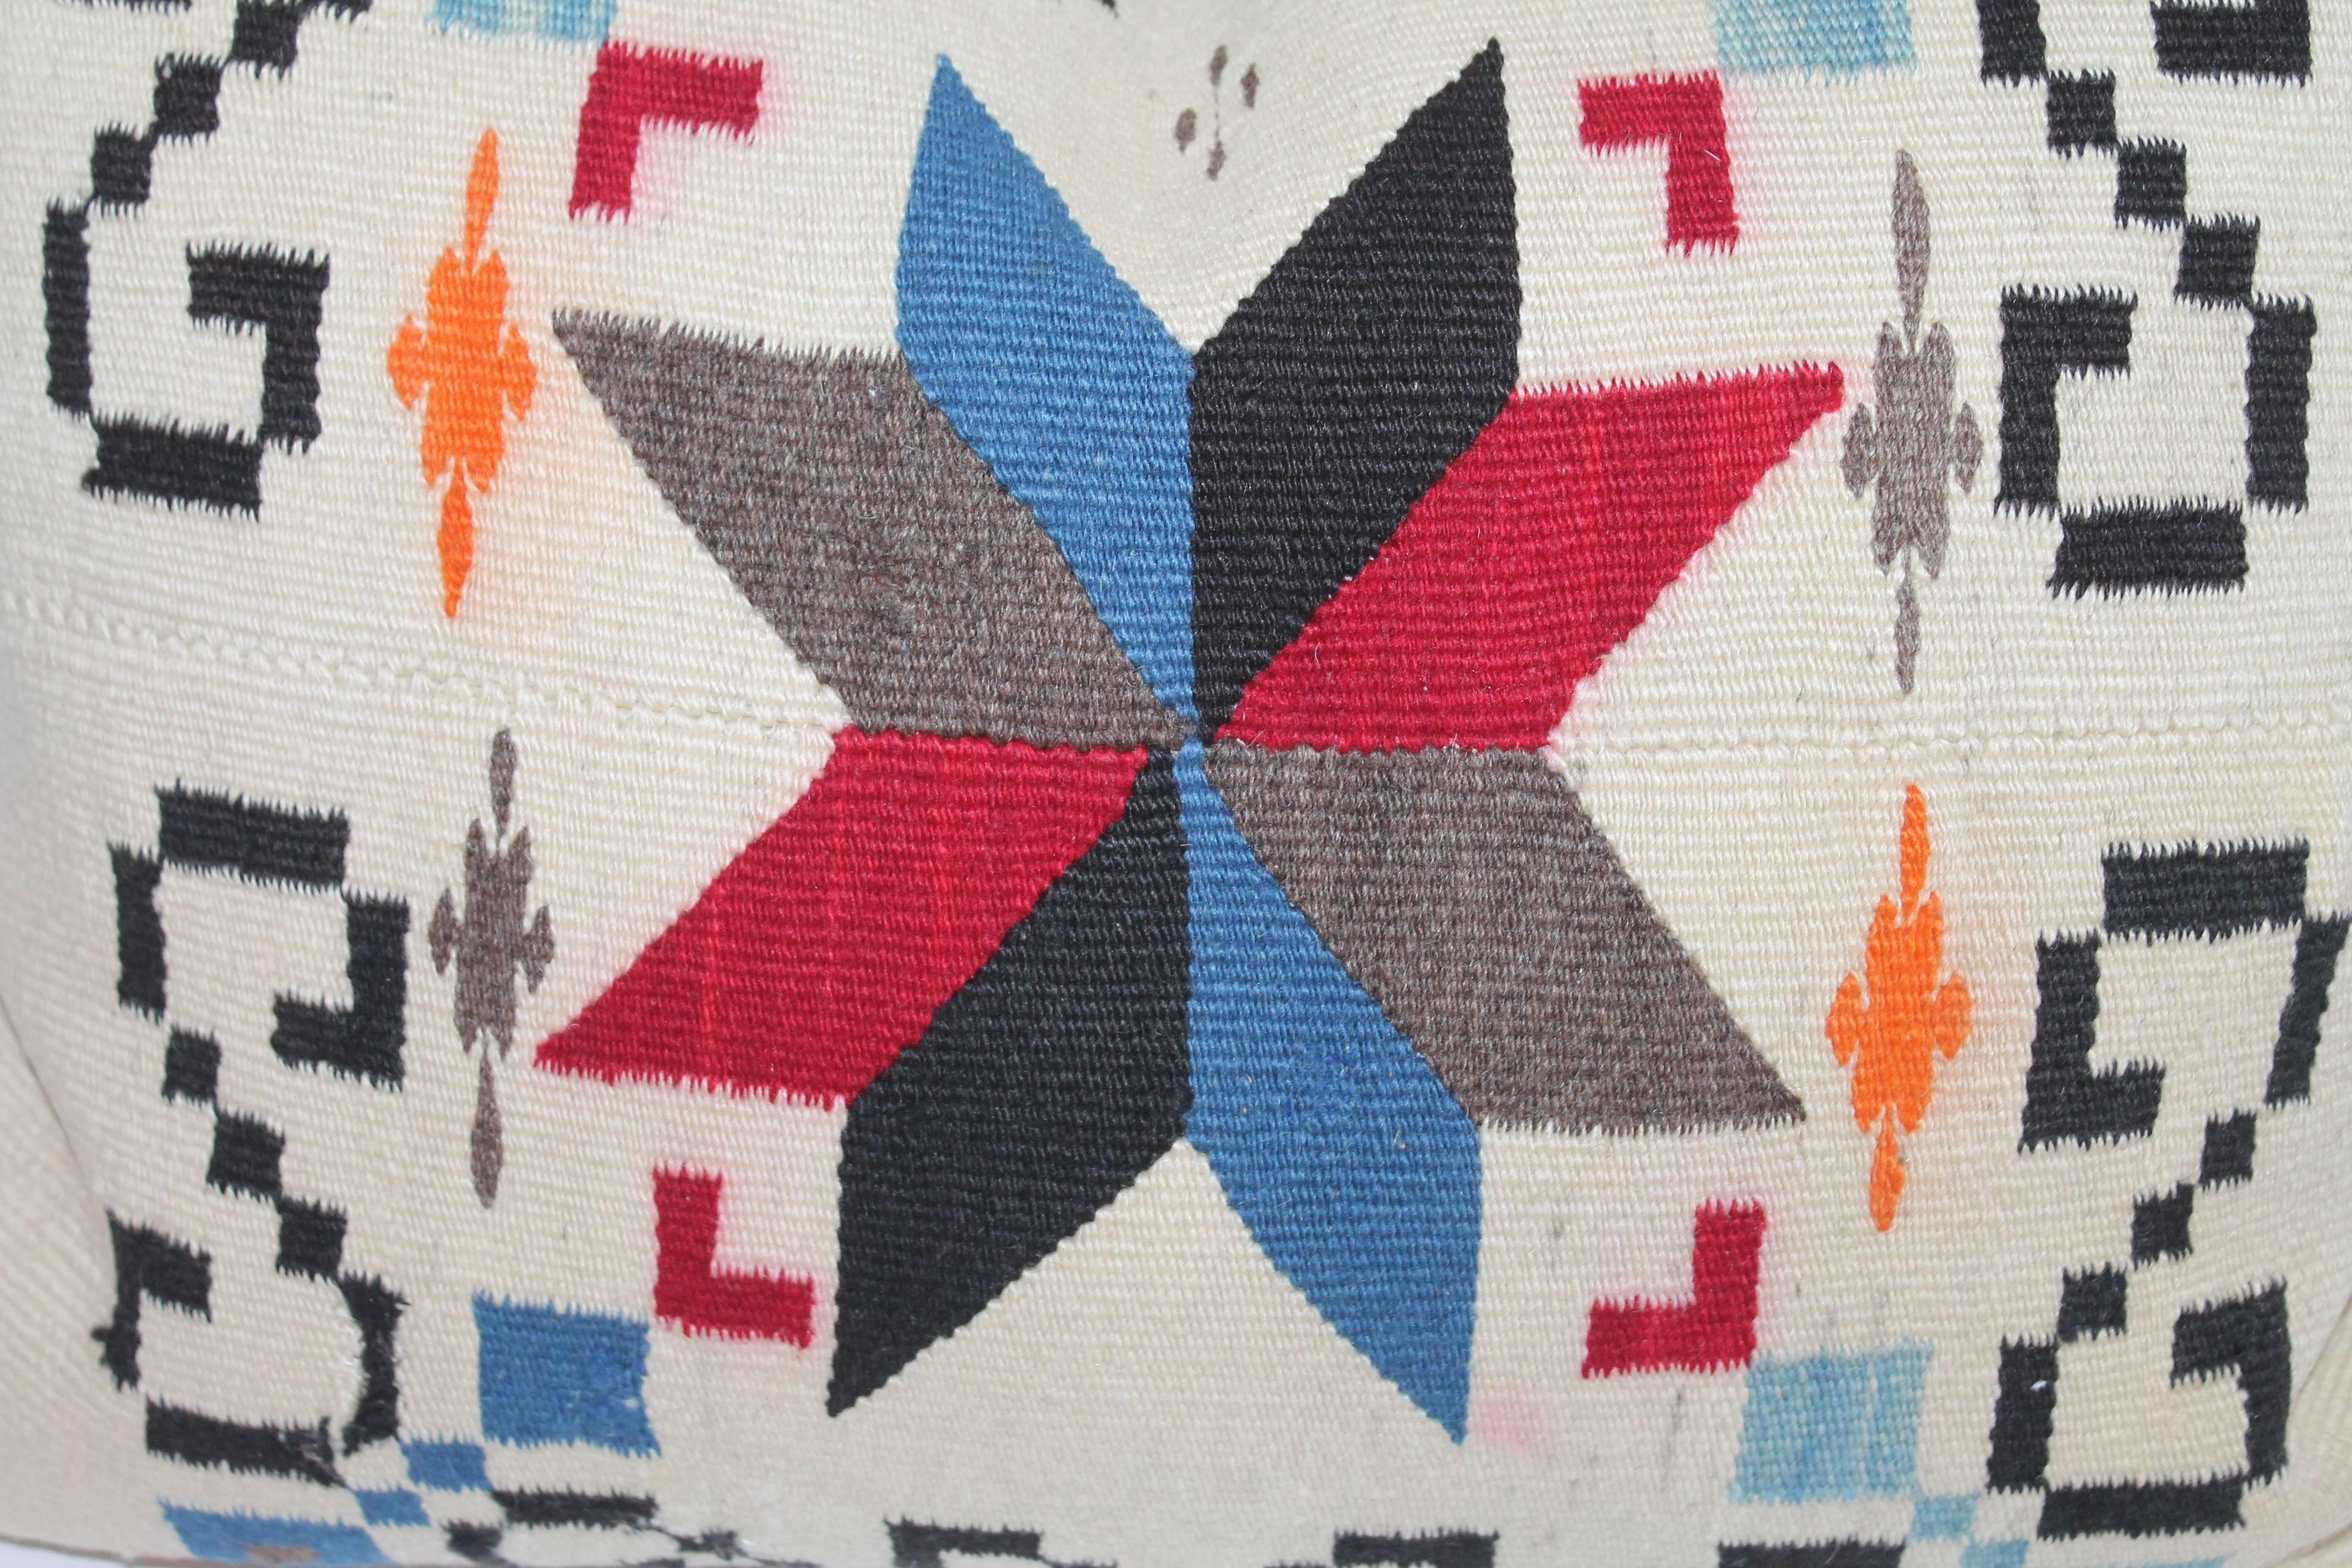 This early weaving star was cut from a very early saddle blanket and has a black cotton linen backing. The colorful and whimsical pattern make this pillow most unusual.